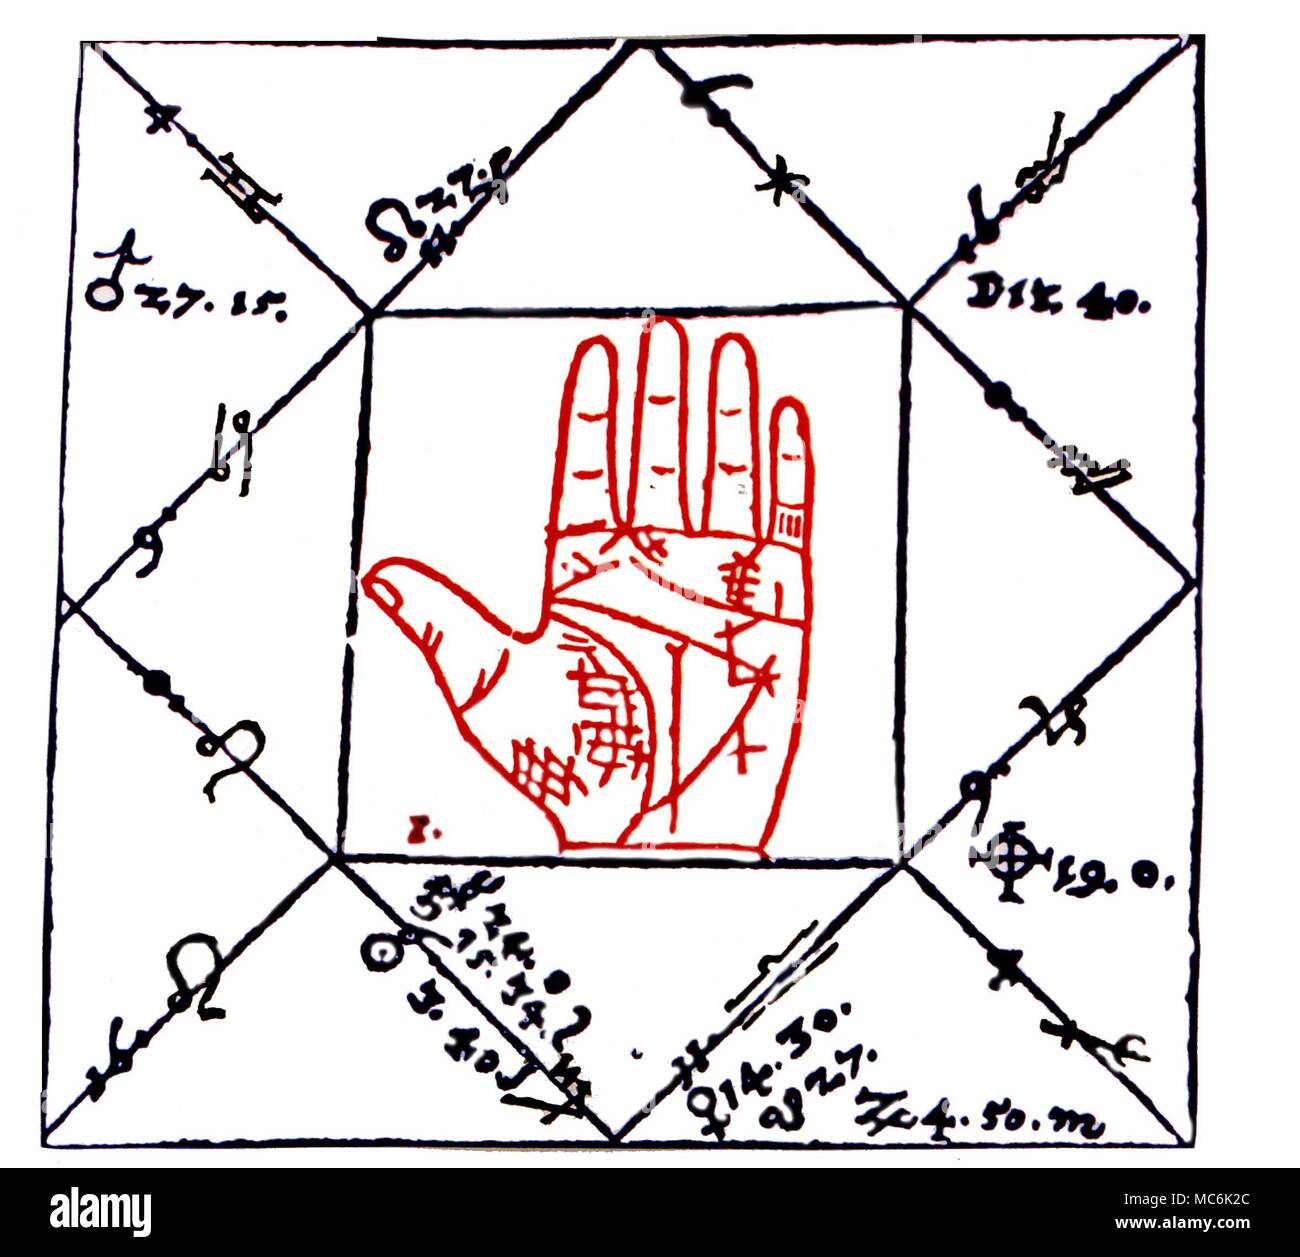 PALMISTRY - Print combining palmistry and astrology - the hand is related to the horoscope, cast for 17 August 1567. From Joannes Rothmann's 'Chiromantiae Theoretica Practica' 1505 Stock Photo